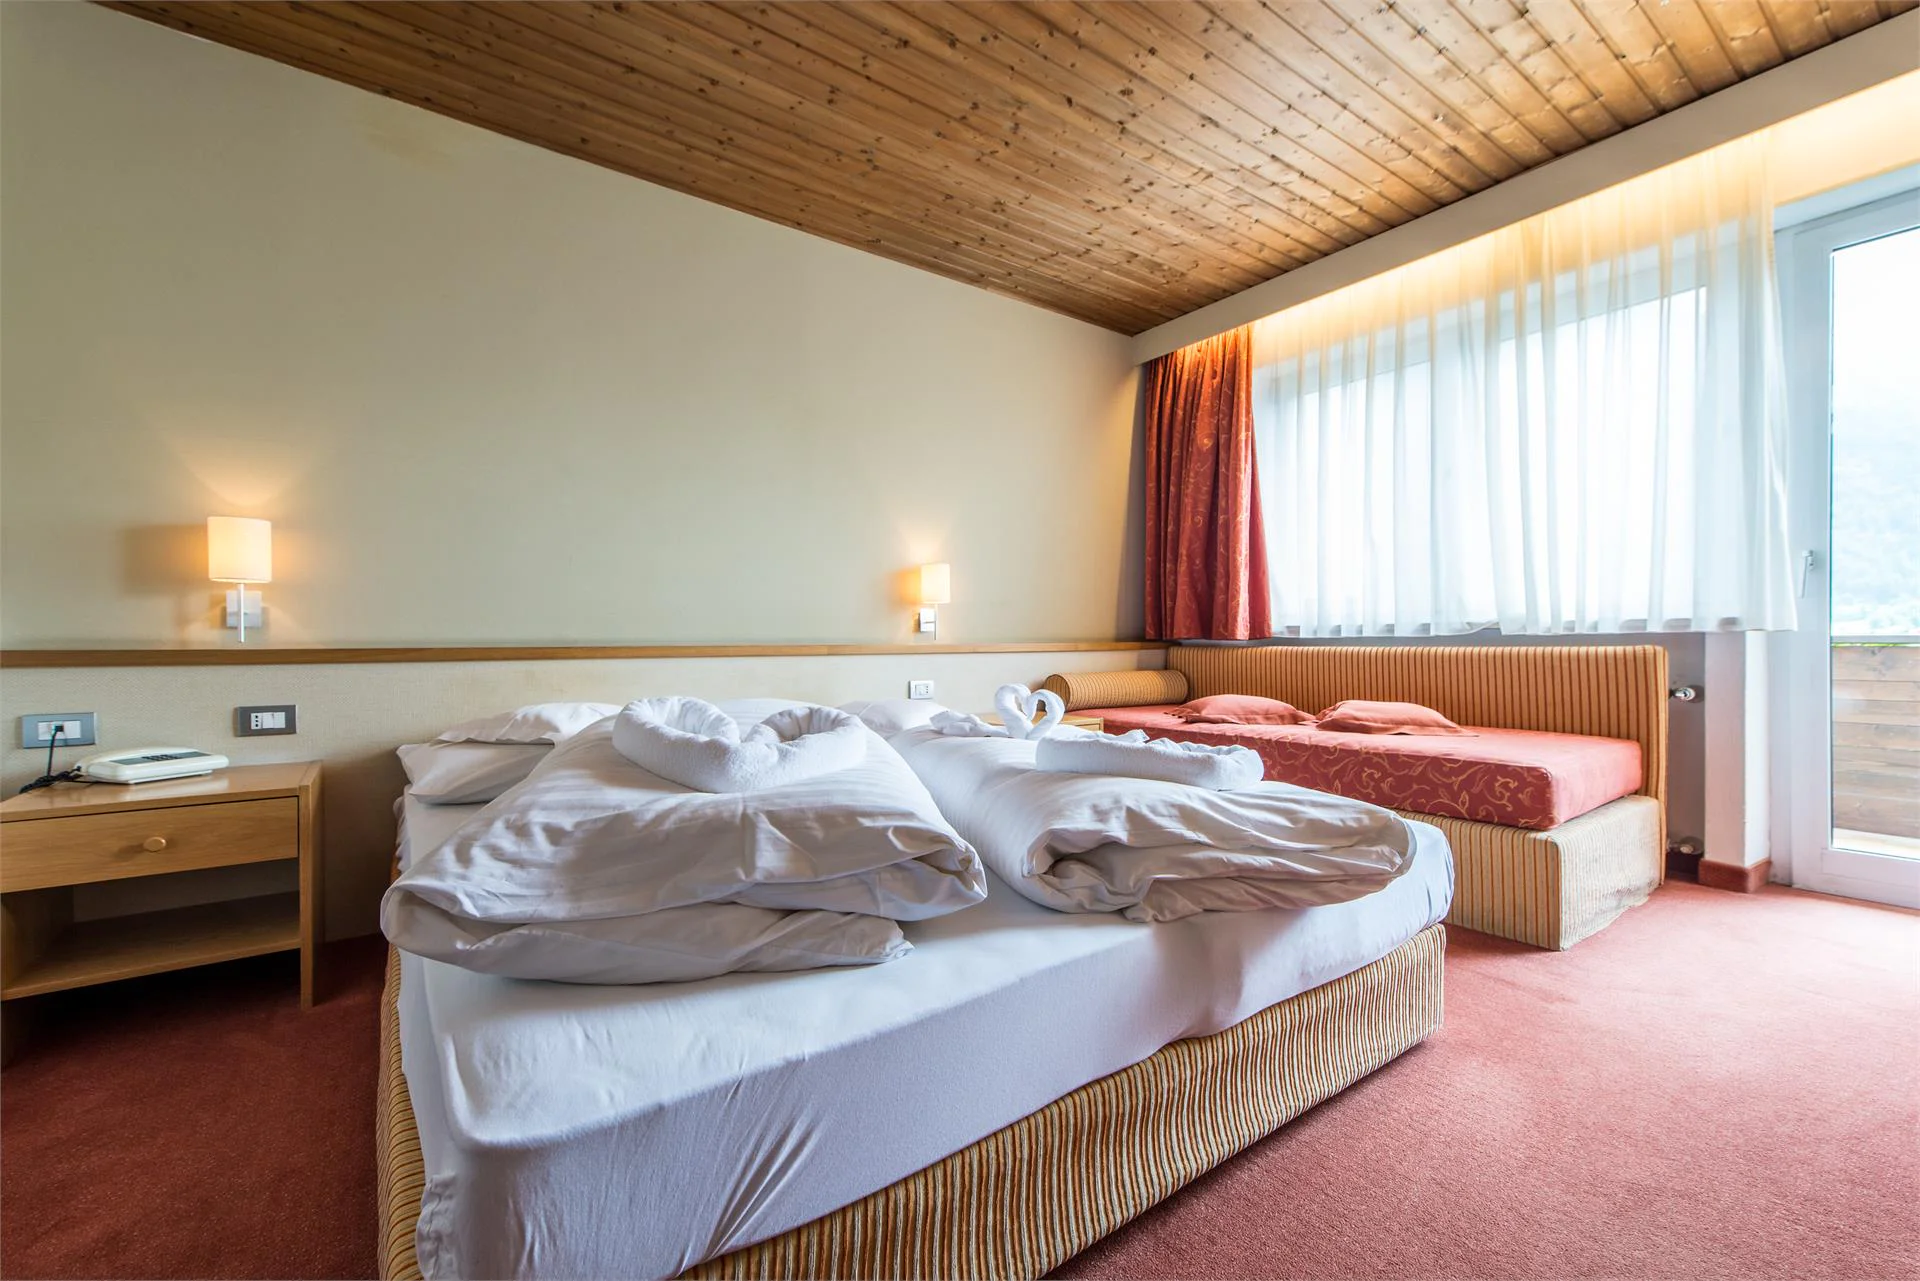 Hotel Taufers Campo Tures 25 suedtirol.info